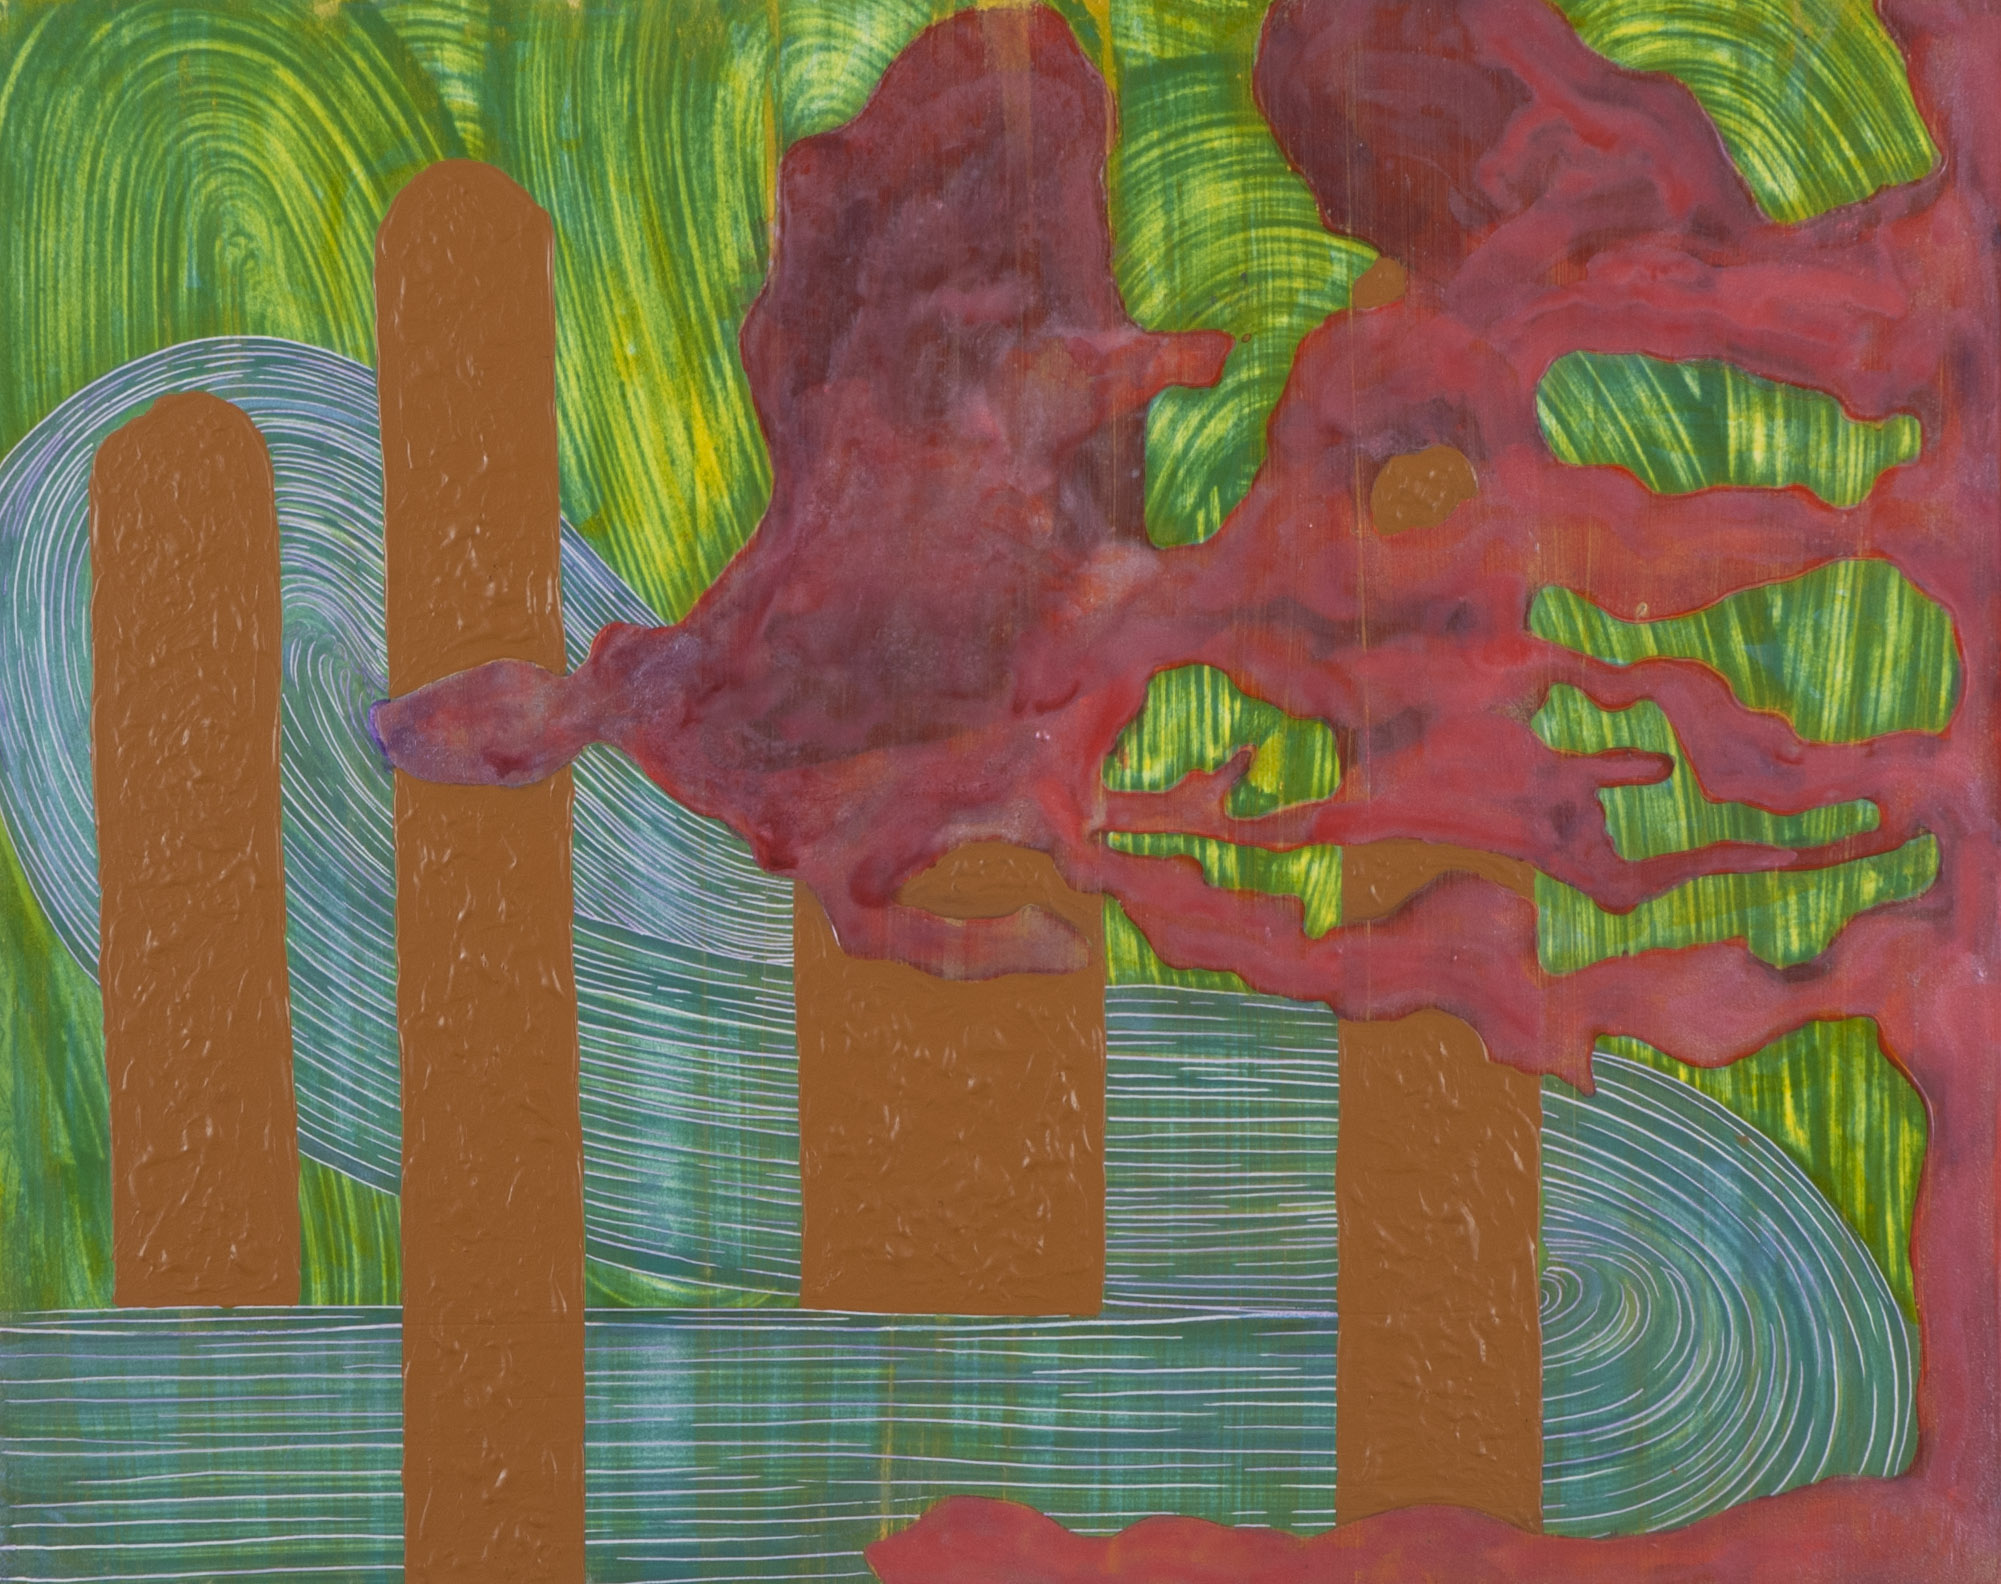   Pink_Brown_Green 'scape   2013  acrylic  16 X 20"   